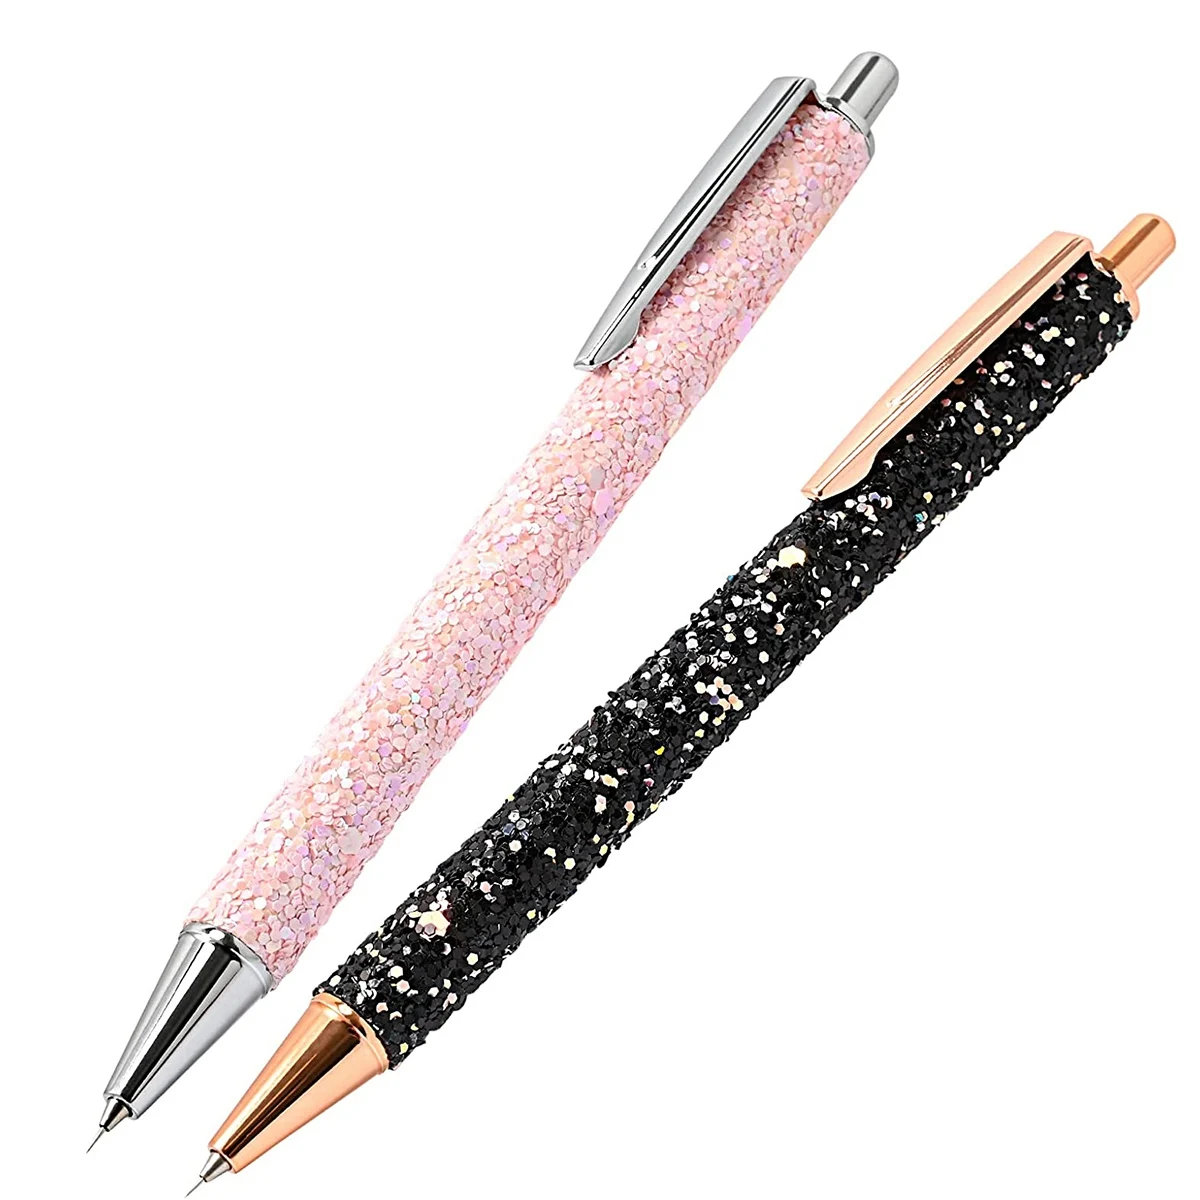 

2 Pcs Glitter Weeding Pen Retractable Pin Pen Weeding Tool for Vinyl Air Release Pen for Easy Craft Vinyl Projects